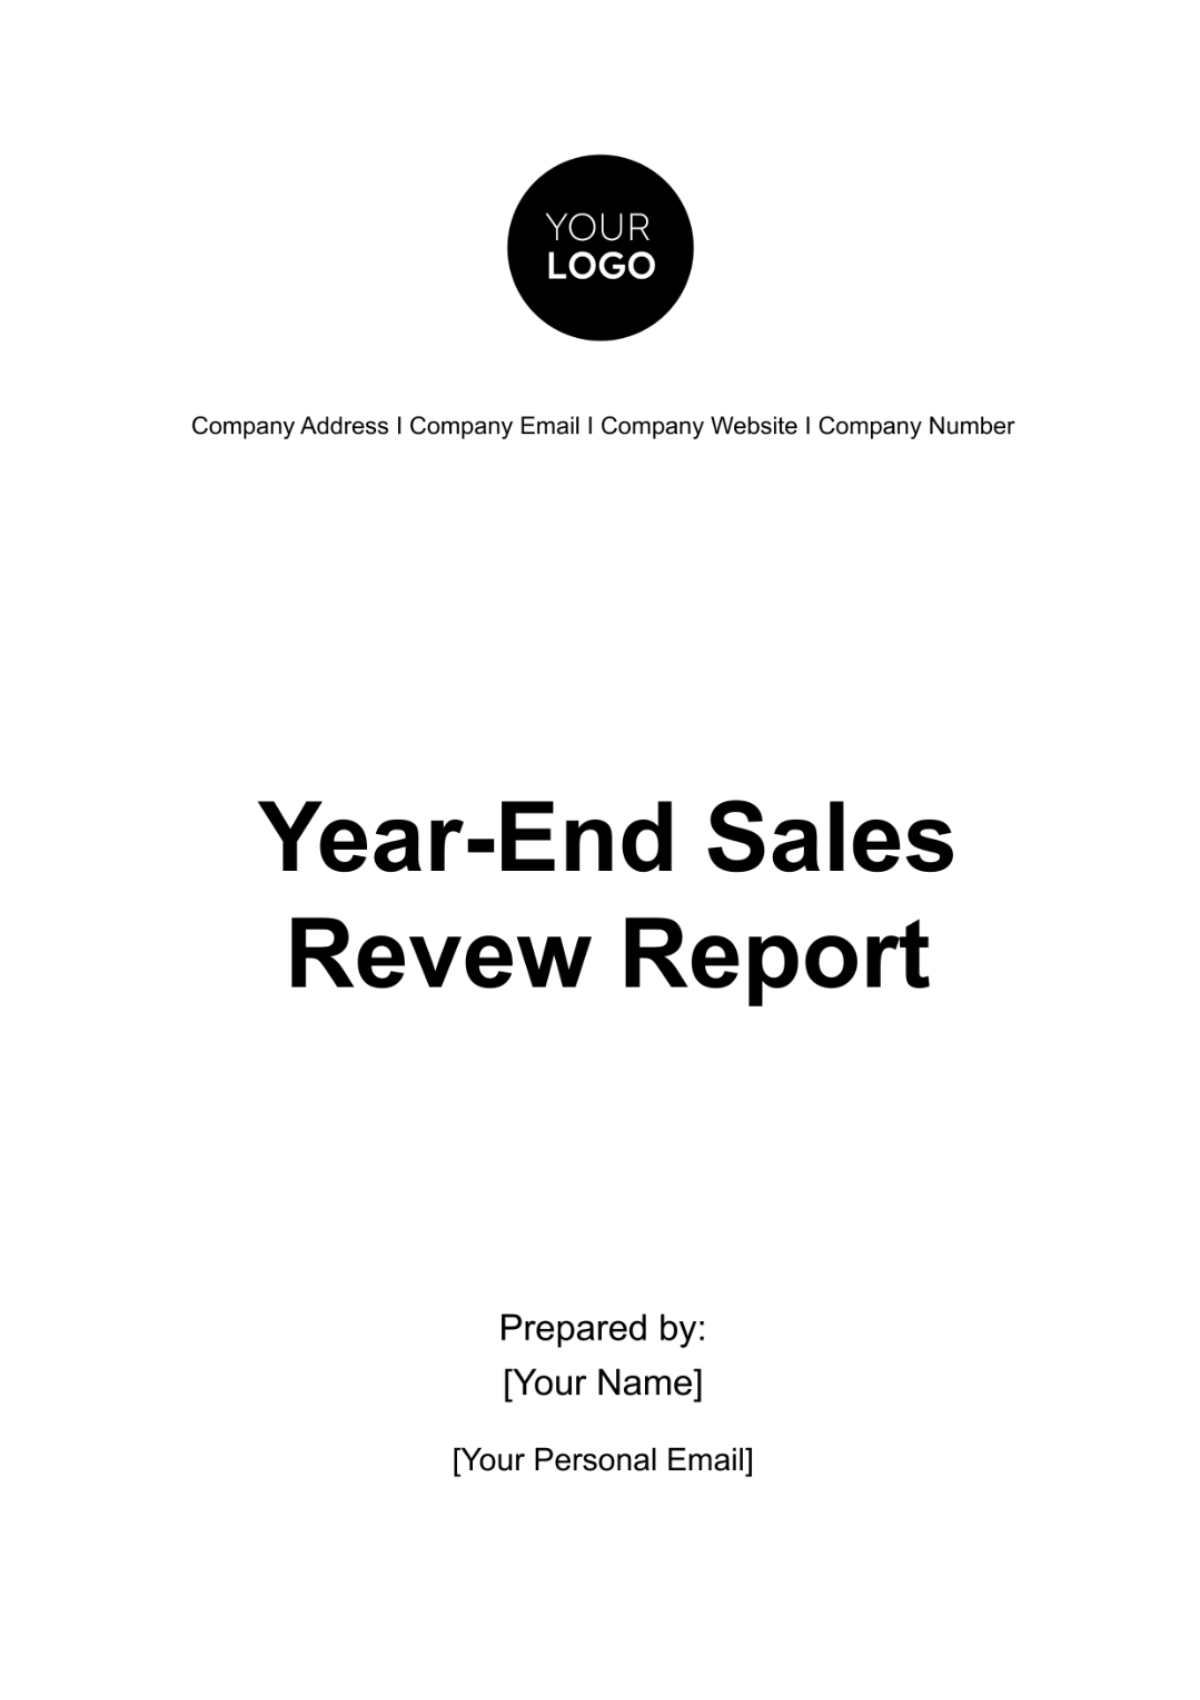 Year-End Sales Review Report Template